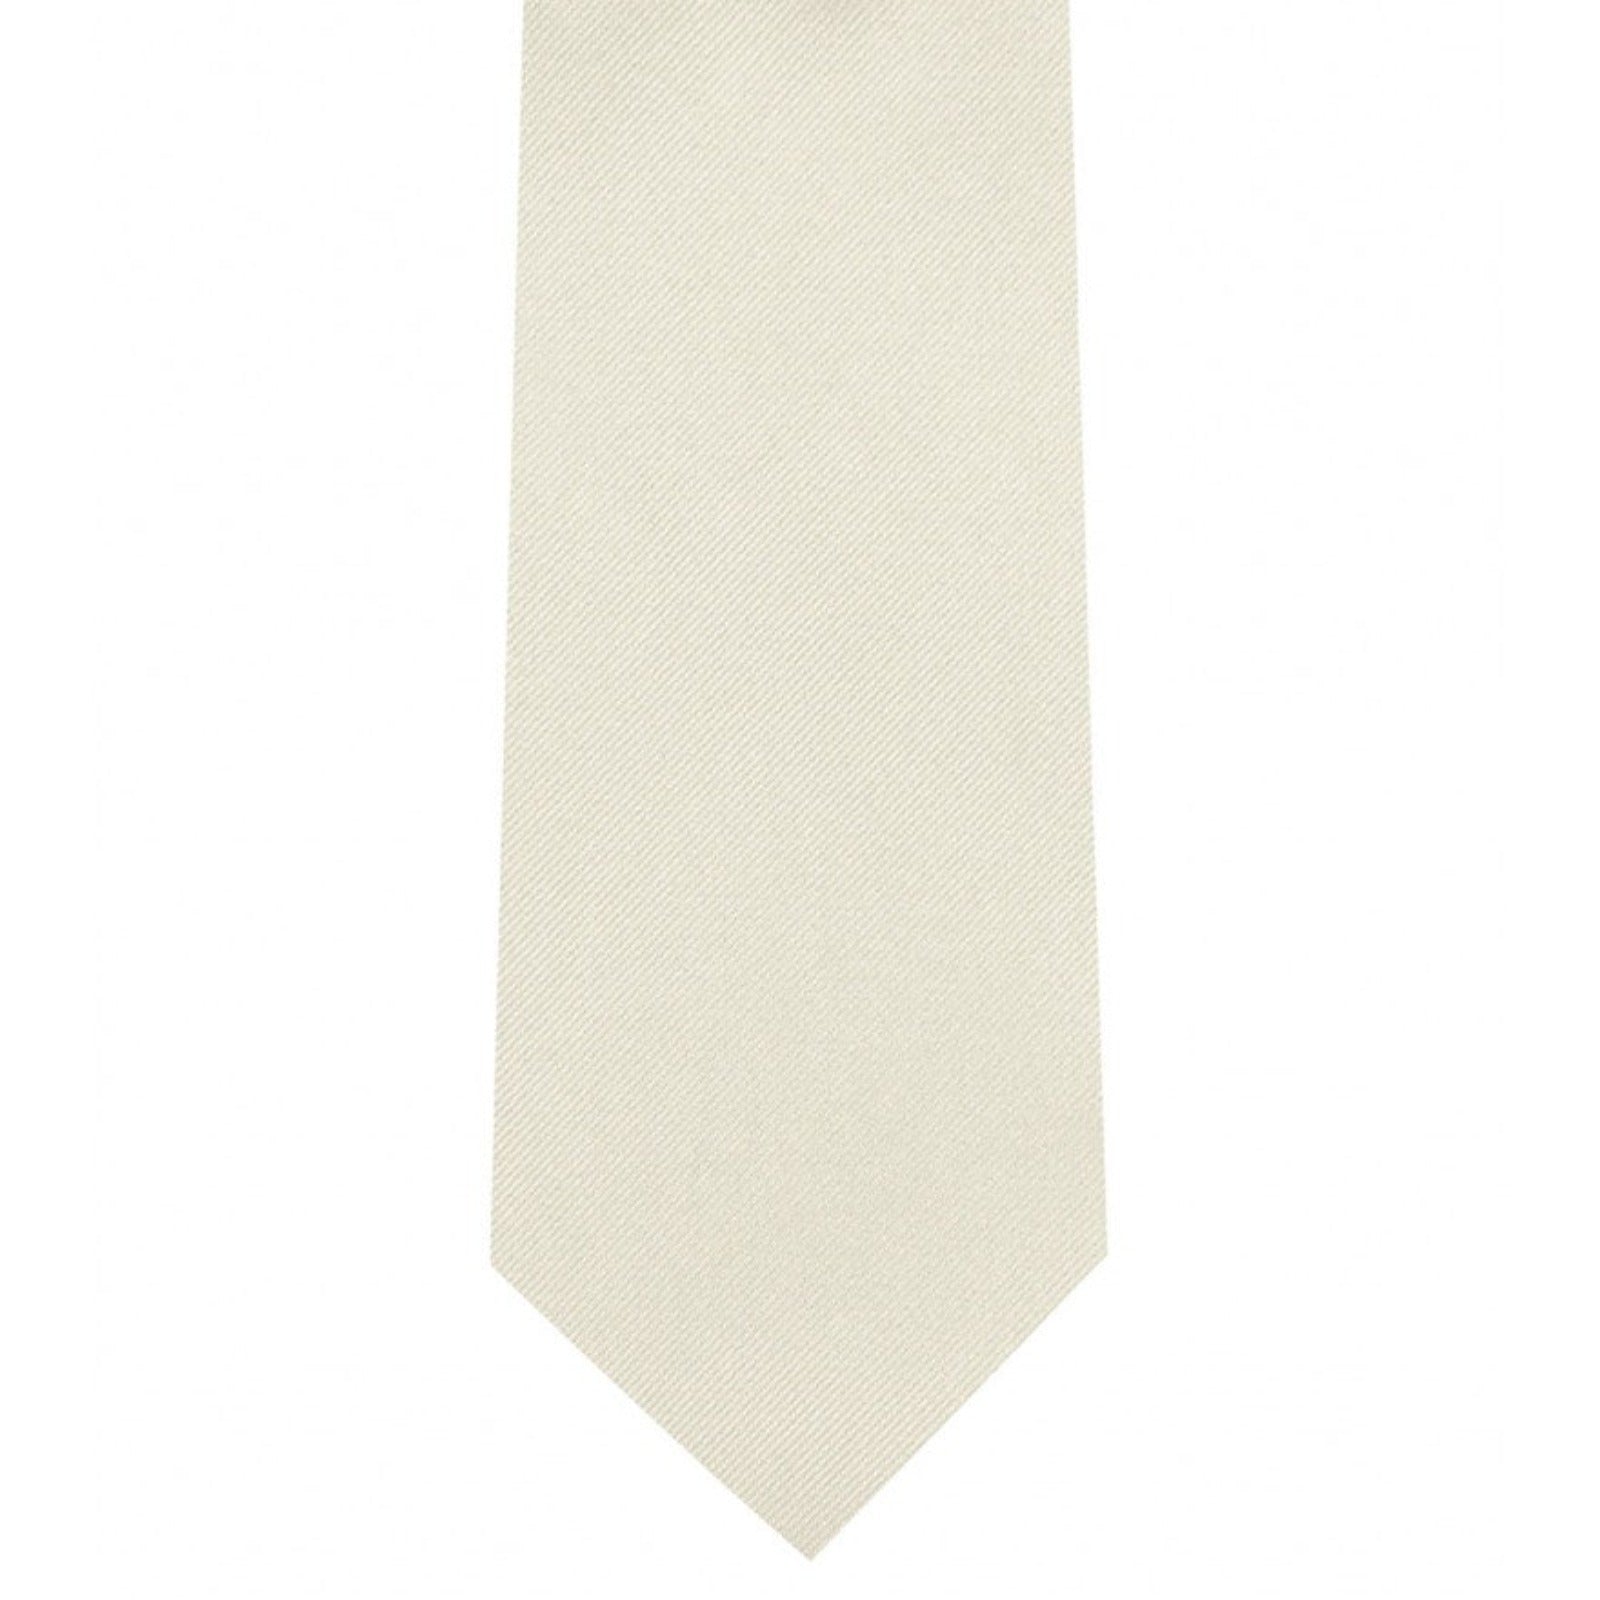 Classic Ivory Tie Ultra Skinny tie width 2.25 inches With Matching Pocket Square | KCT Menswear